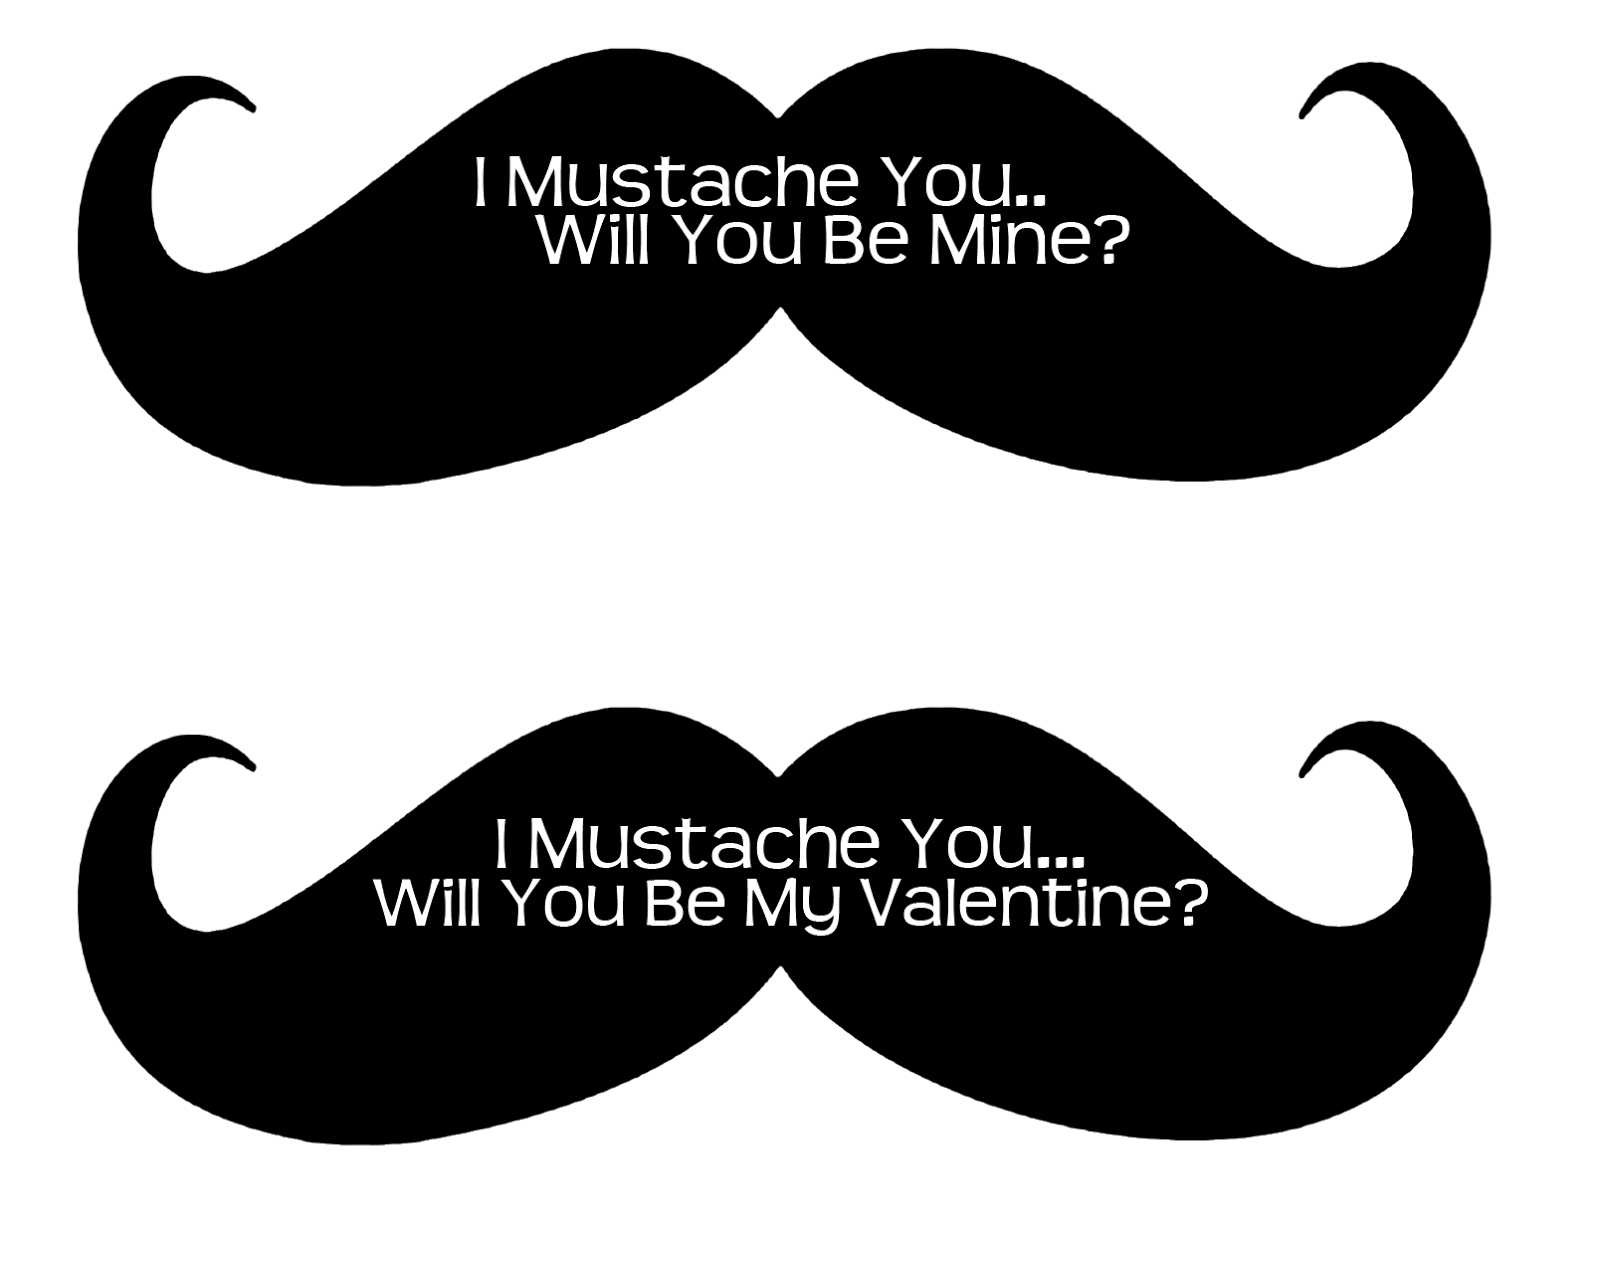 I Mustache You A Question| Free Printable Valentines | Frugalful 2.0 - Free Printable Mustache